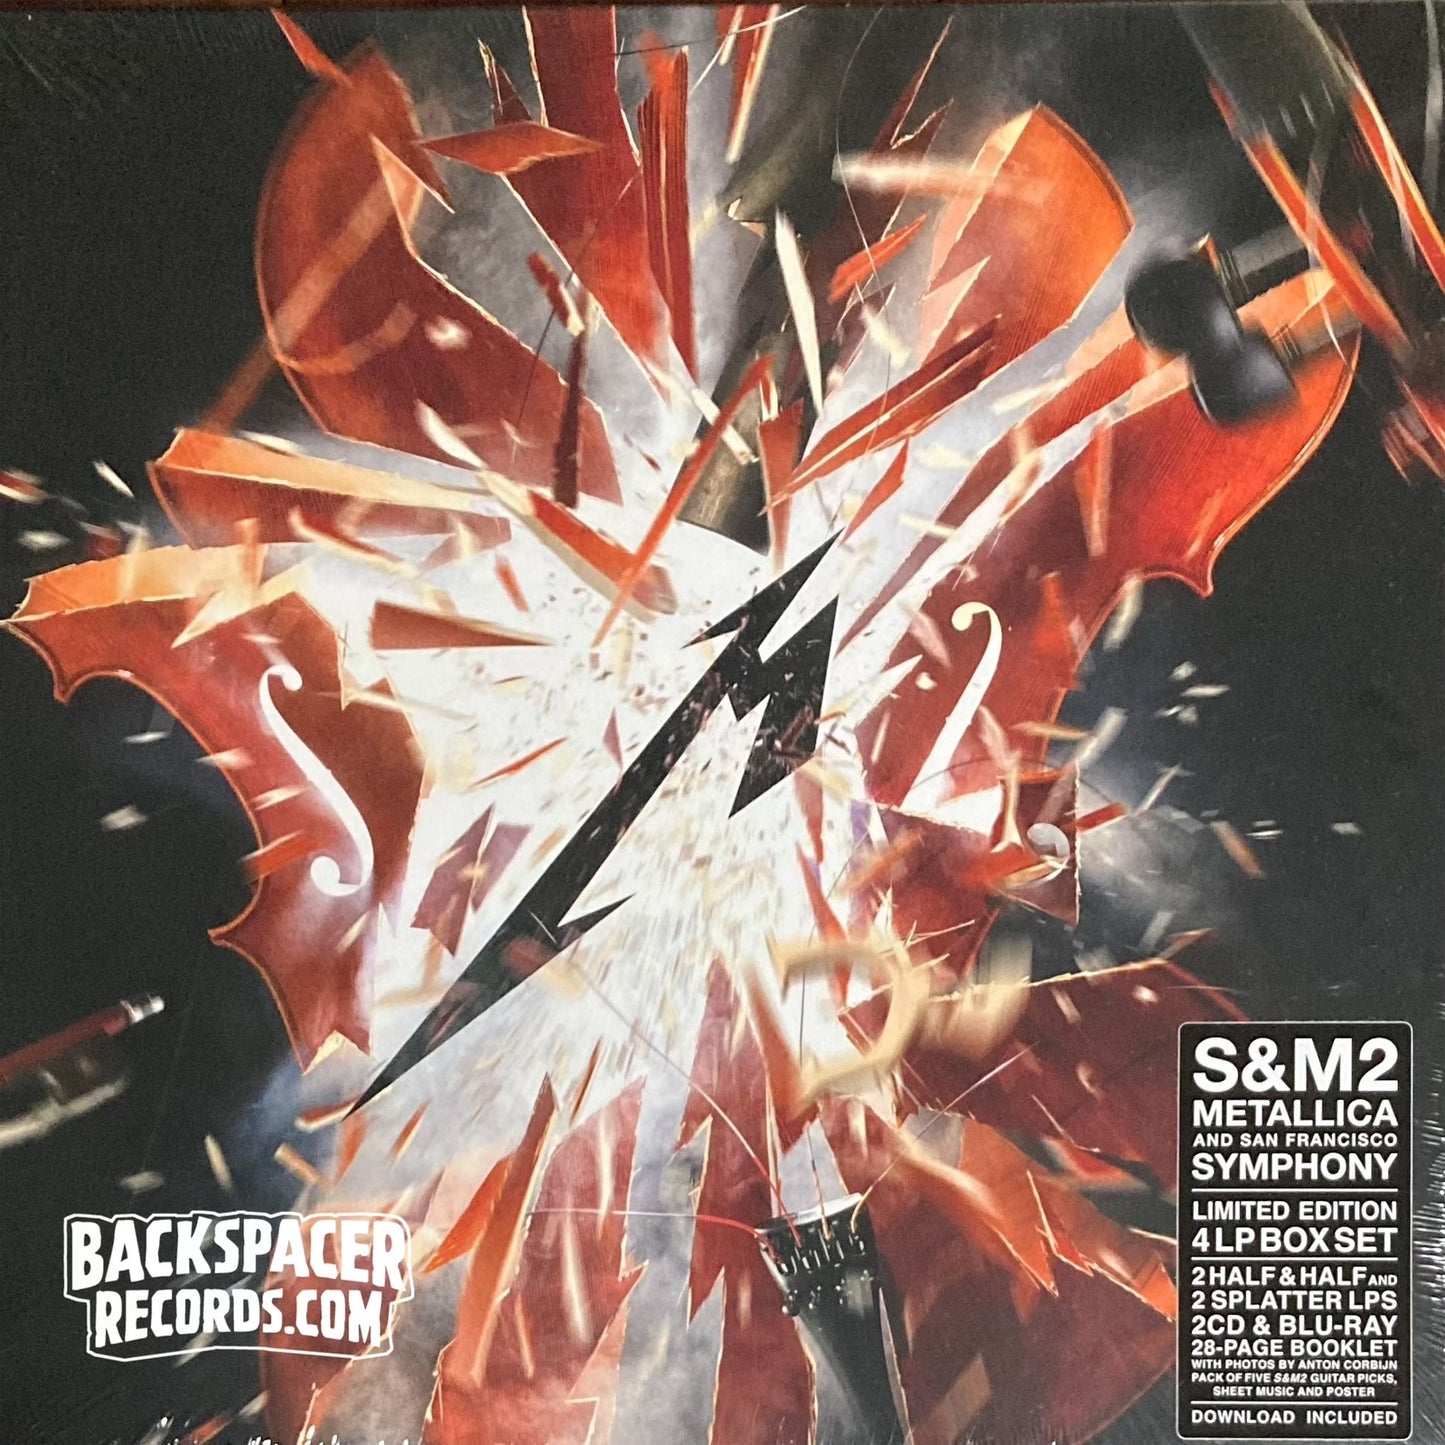 Metallica & San Francisco Symphony ‎– S&M2 (Limited Deluxe Edition) Boxset (Sealed)